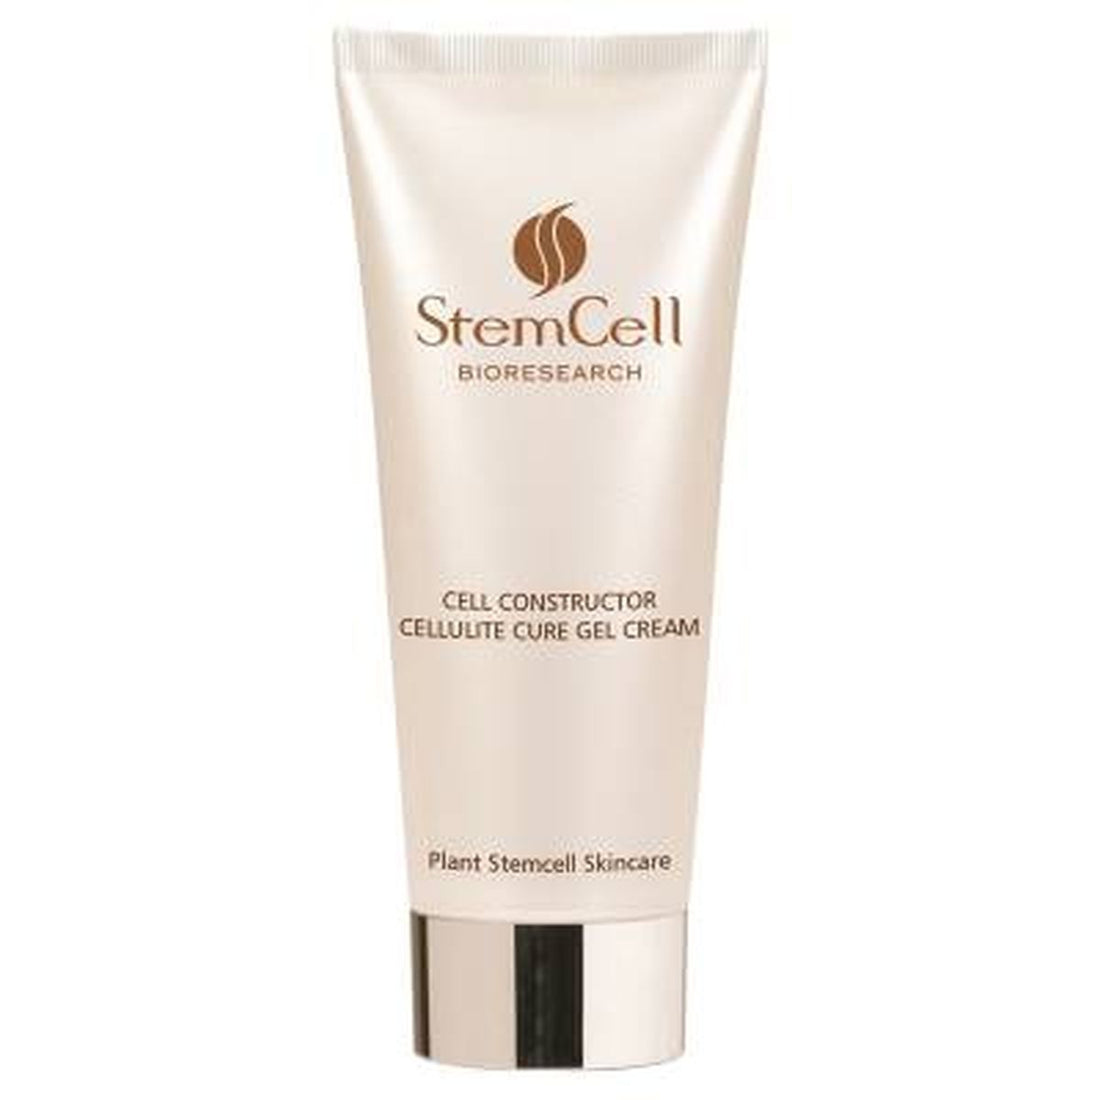 Stemcell Cell Constructor Gel cicatrisant anti-cellulite Crème 200 ml